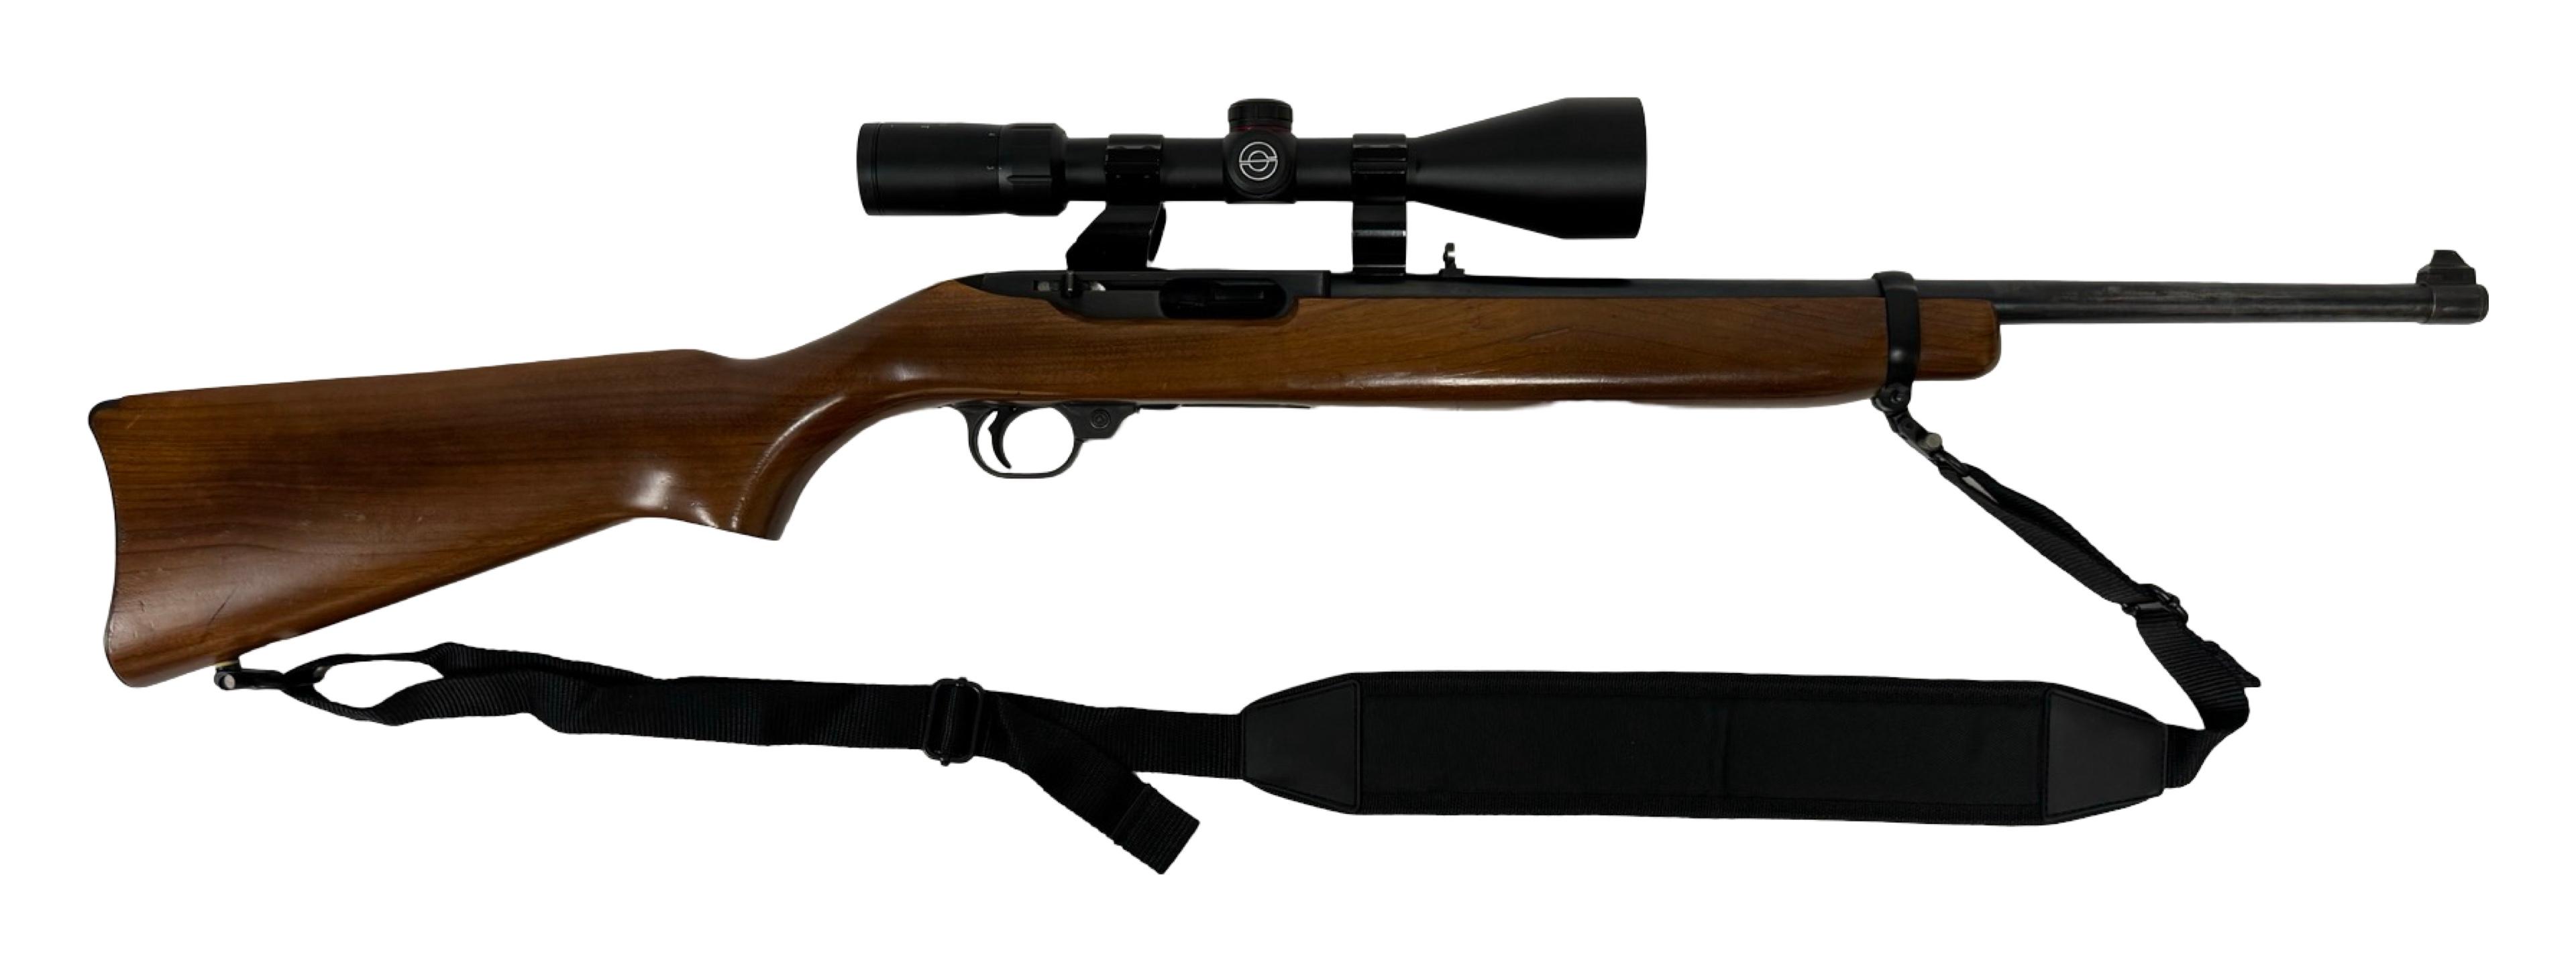 Excellent 1979 Ruger Carbine .44 MAGNUM Semi-Automatic Rifle with Scope and Sling